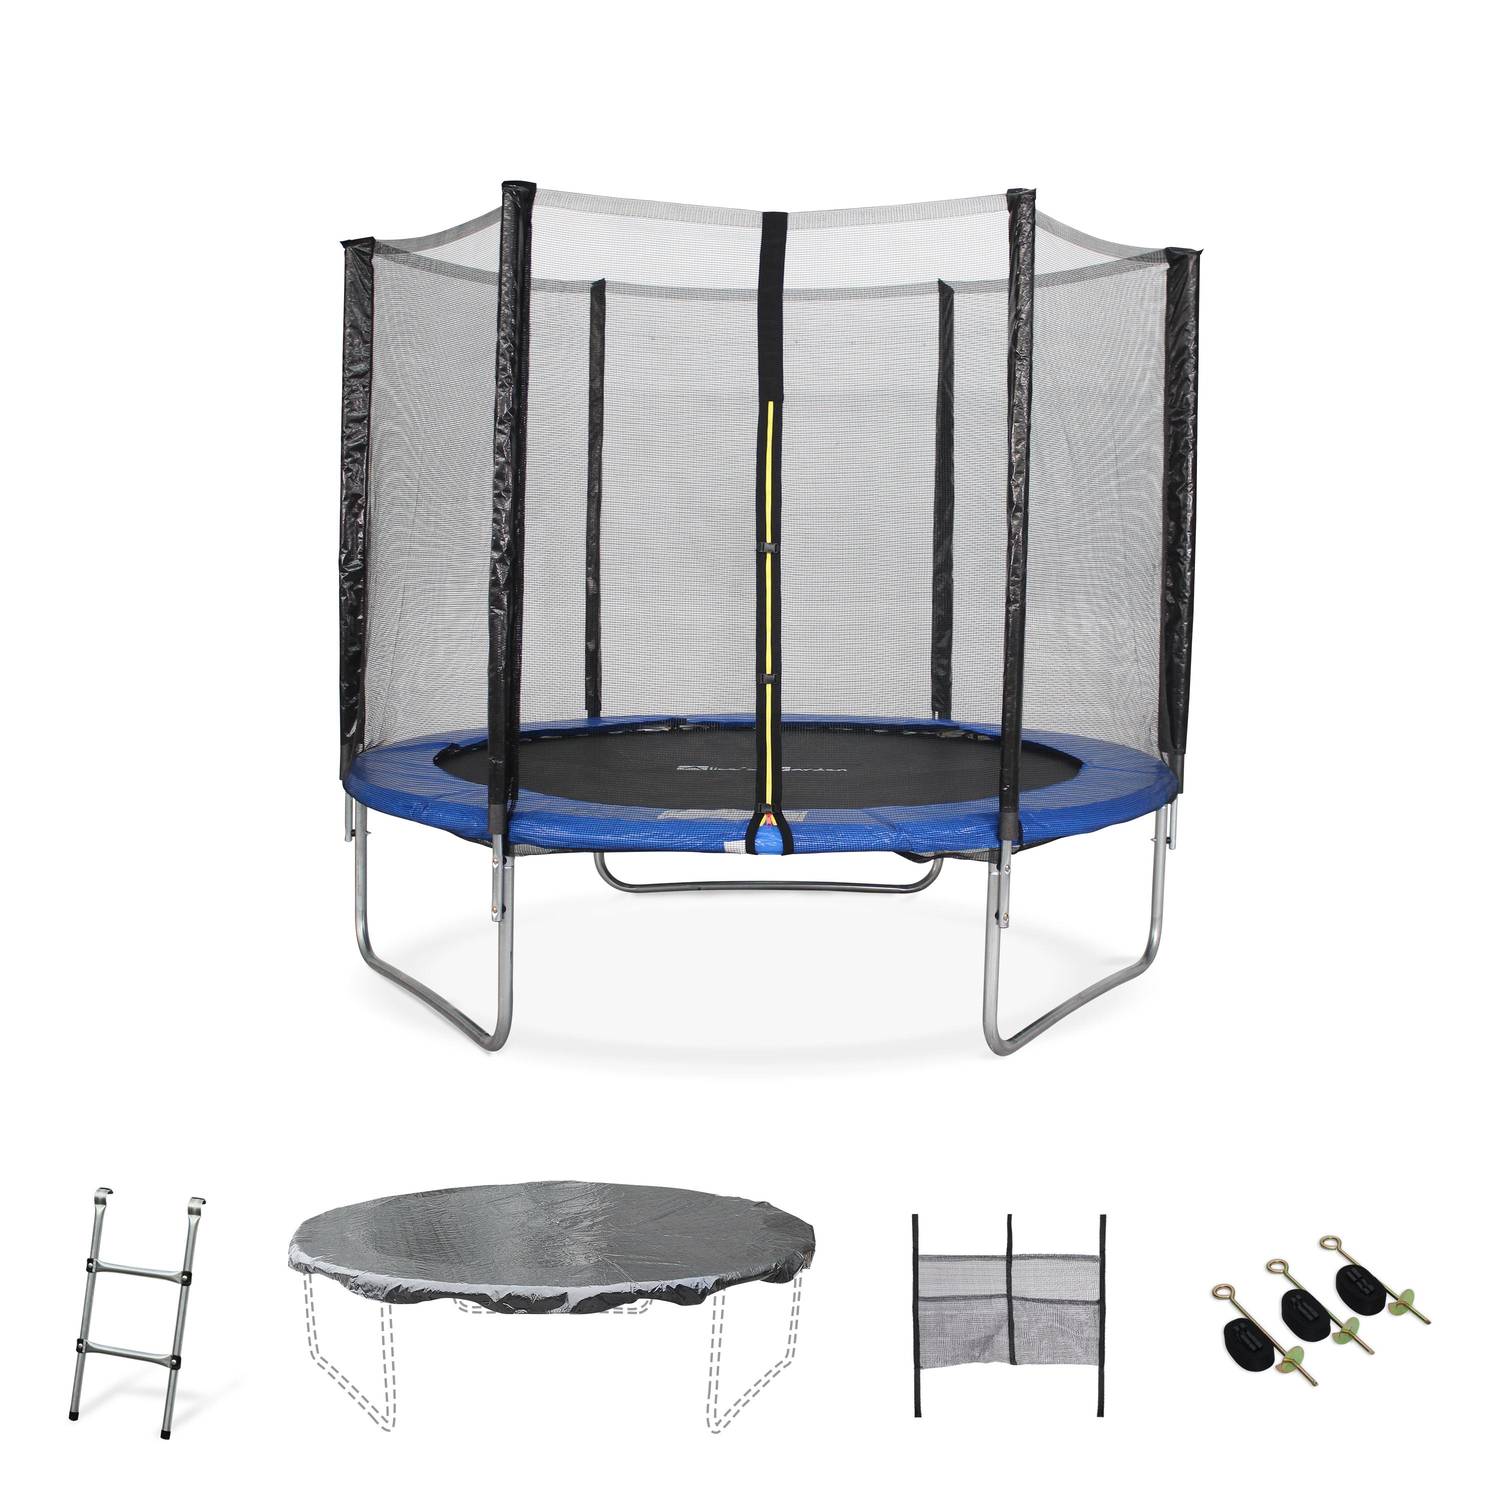 8ft trampoline with safety net and accessory kit - Ø250cm - Pluton Photo1